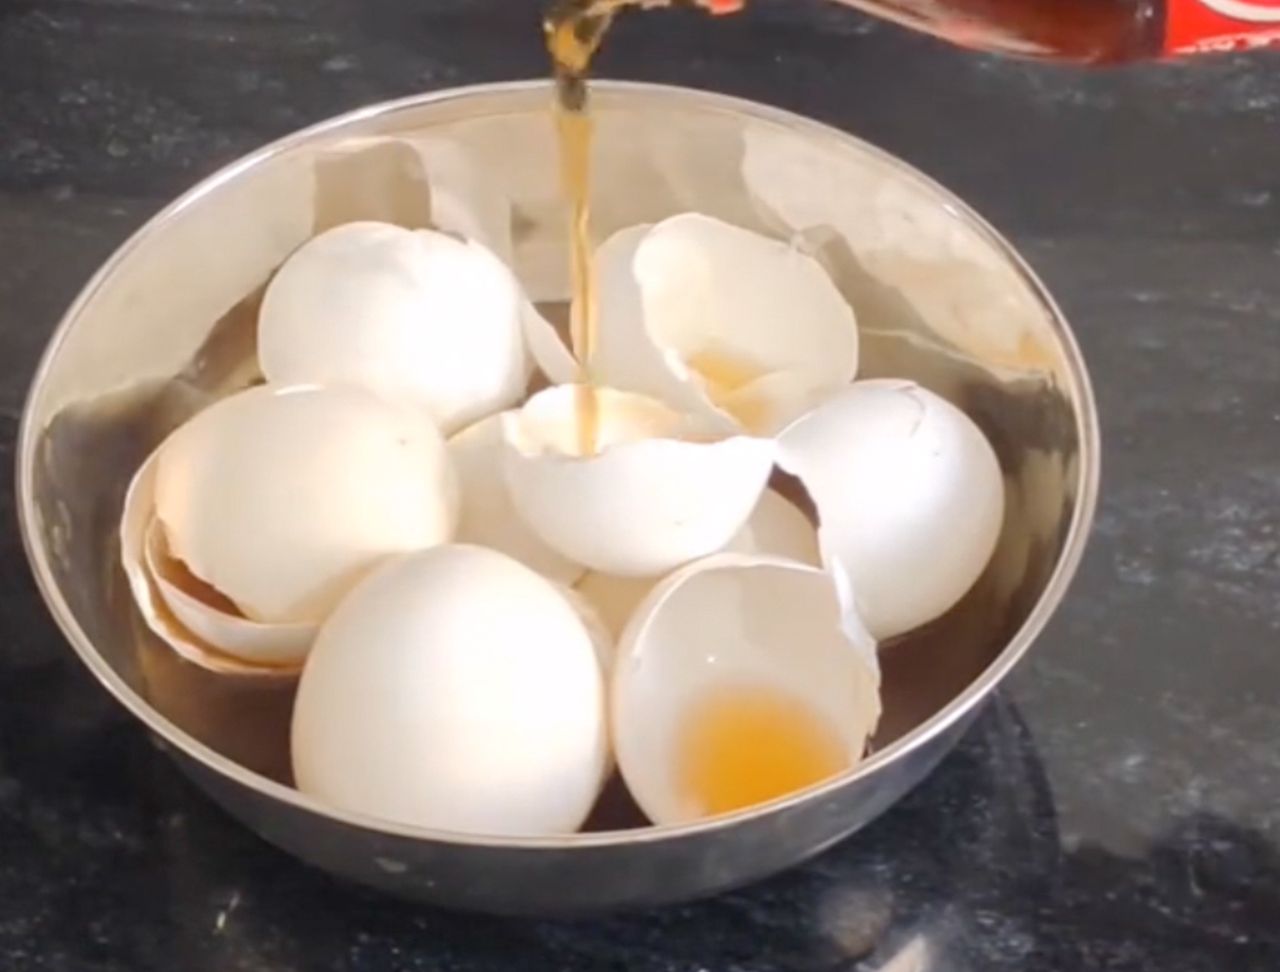 Cleaning hack: Eggshells and cola combo quickly banishes burnt residue